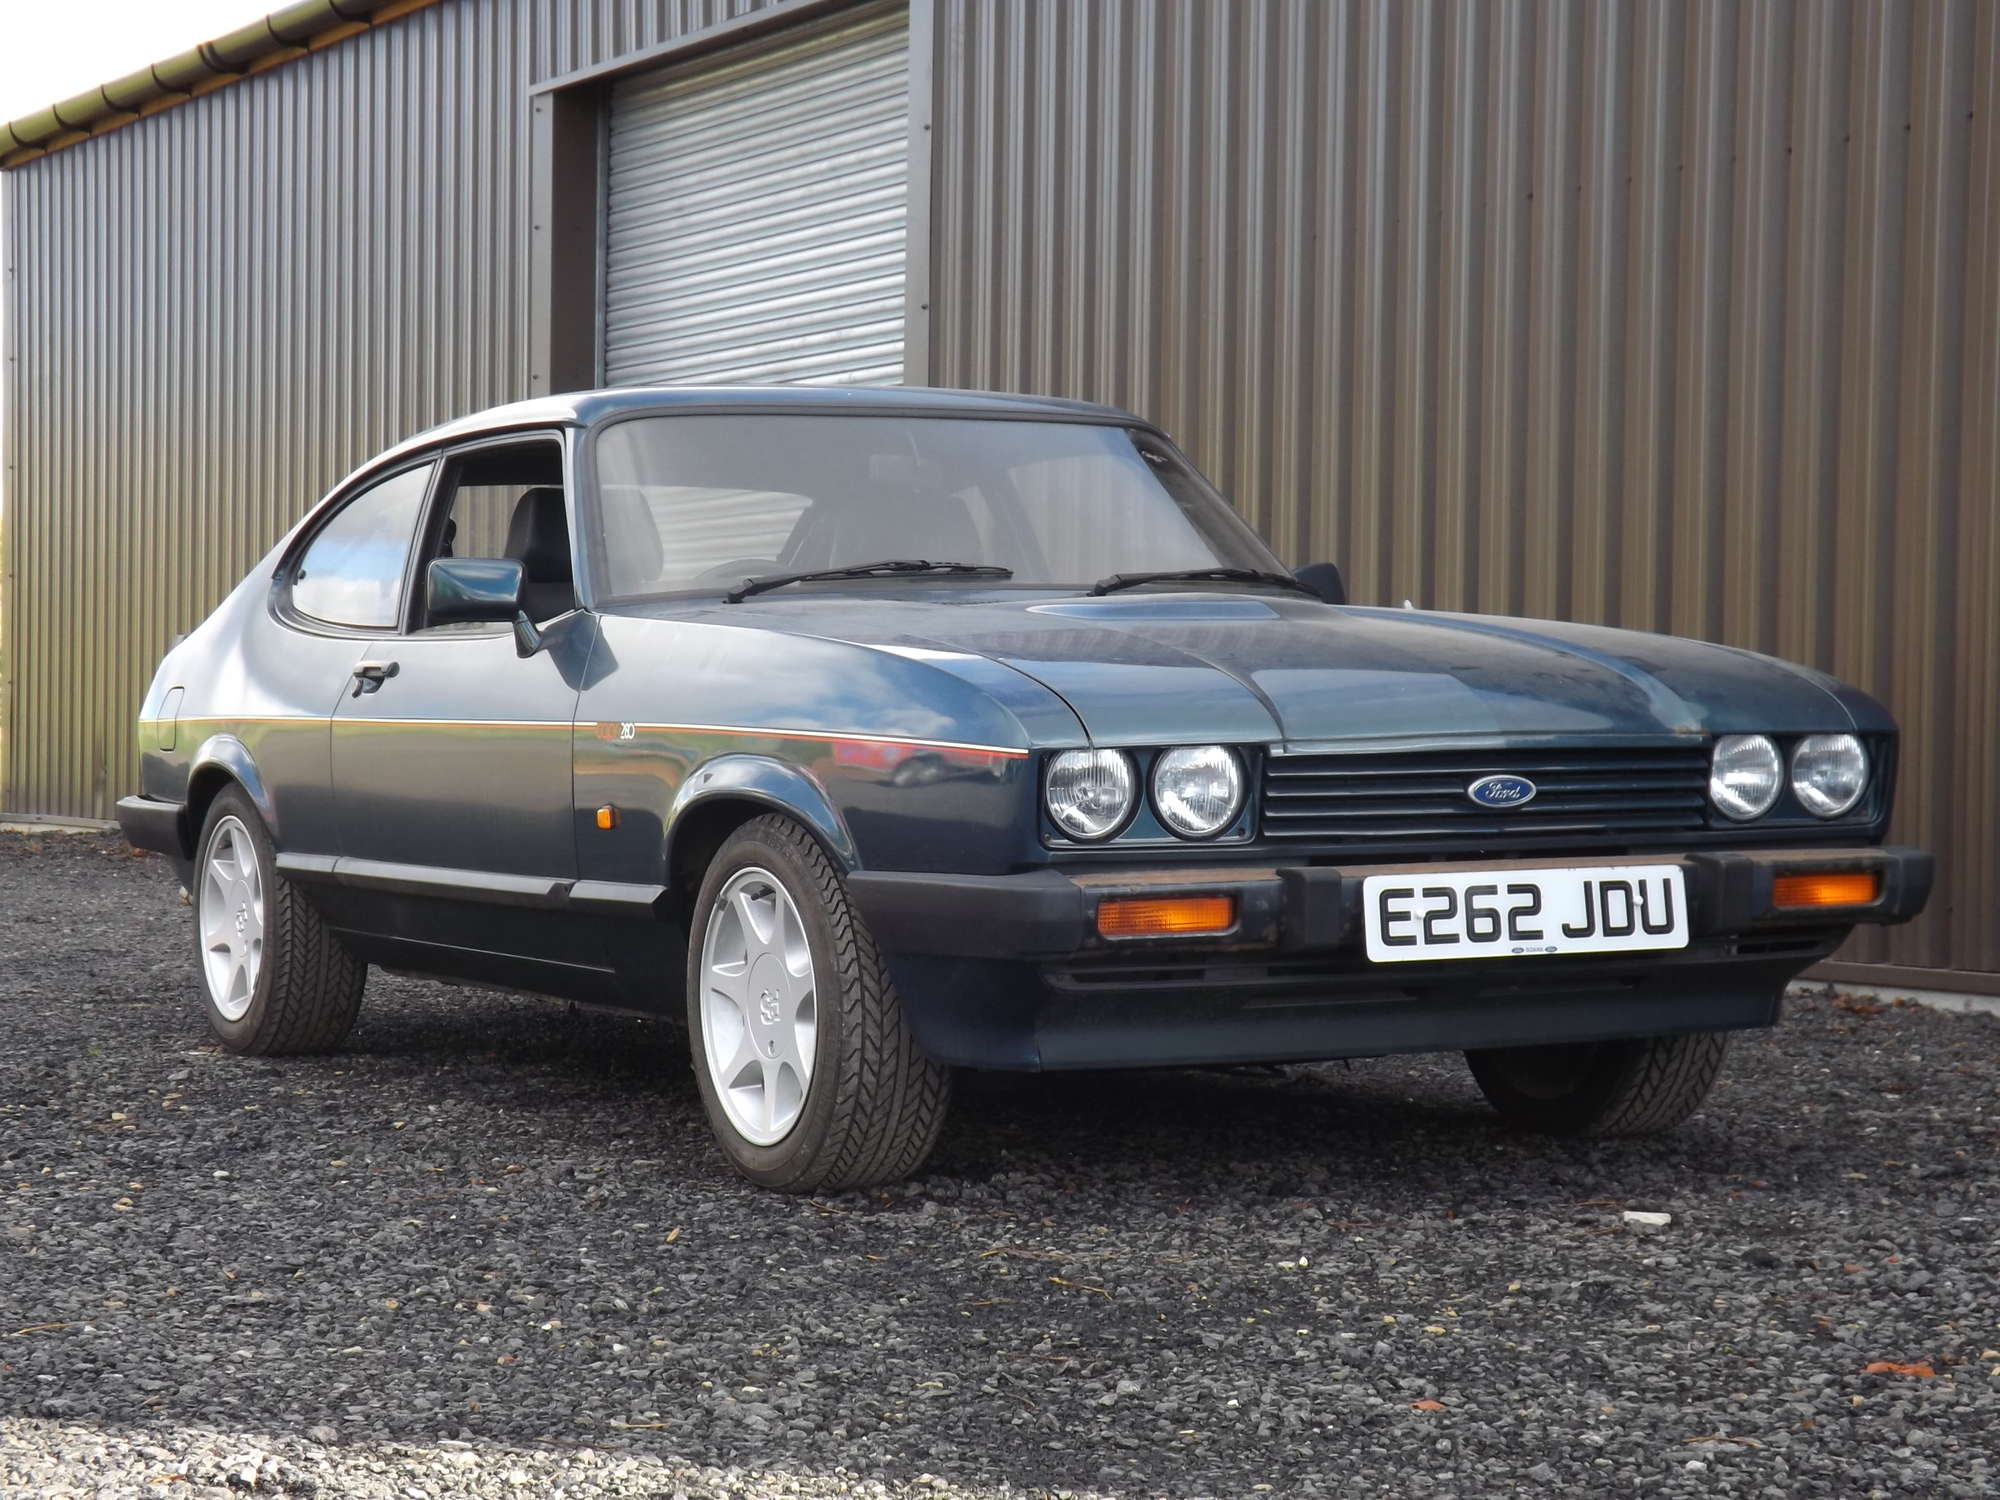 Auction star: Low-mileage Ford Capri 280 is a pre-Christmas cracker